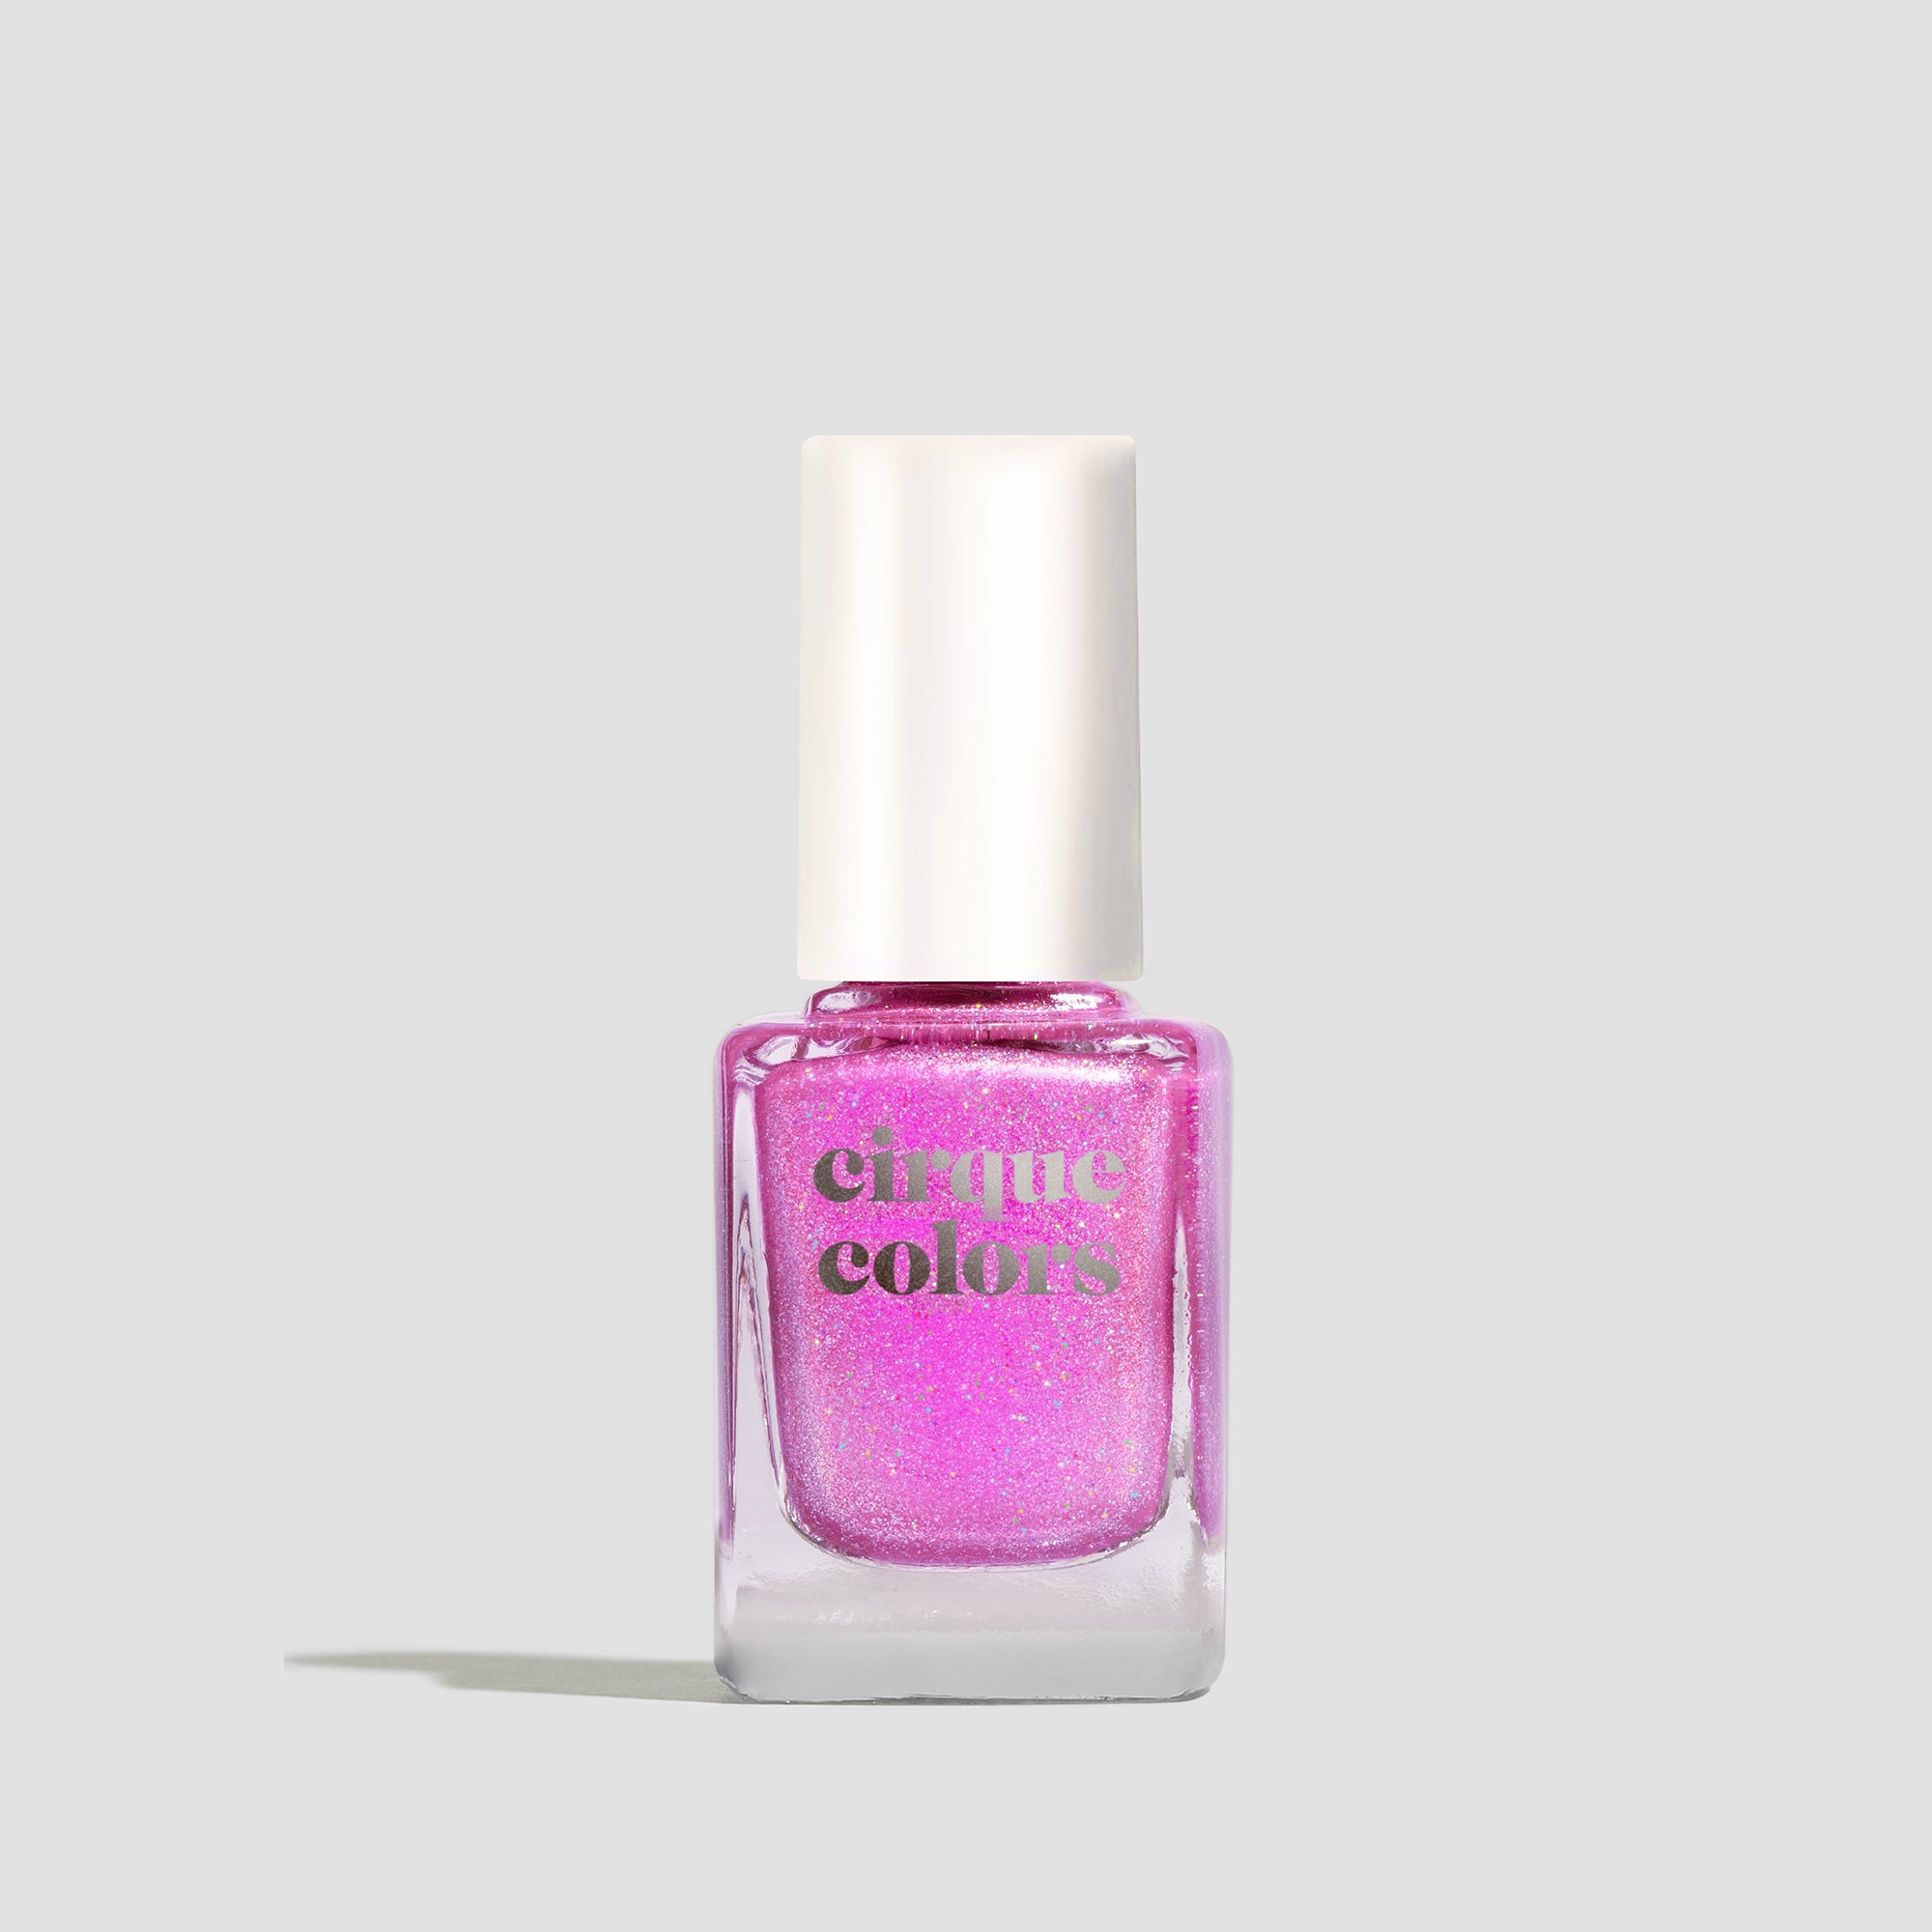 *PRE-ORDER* Cirque Colors - Pinky’s Up (LE)